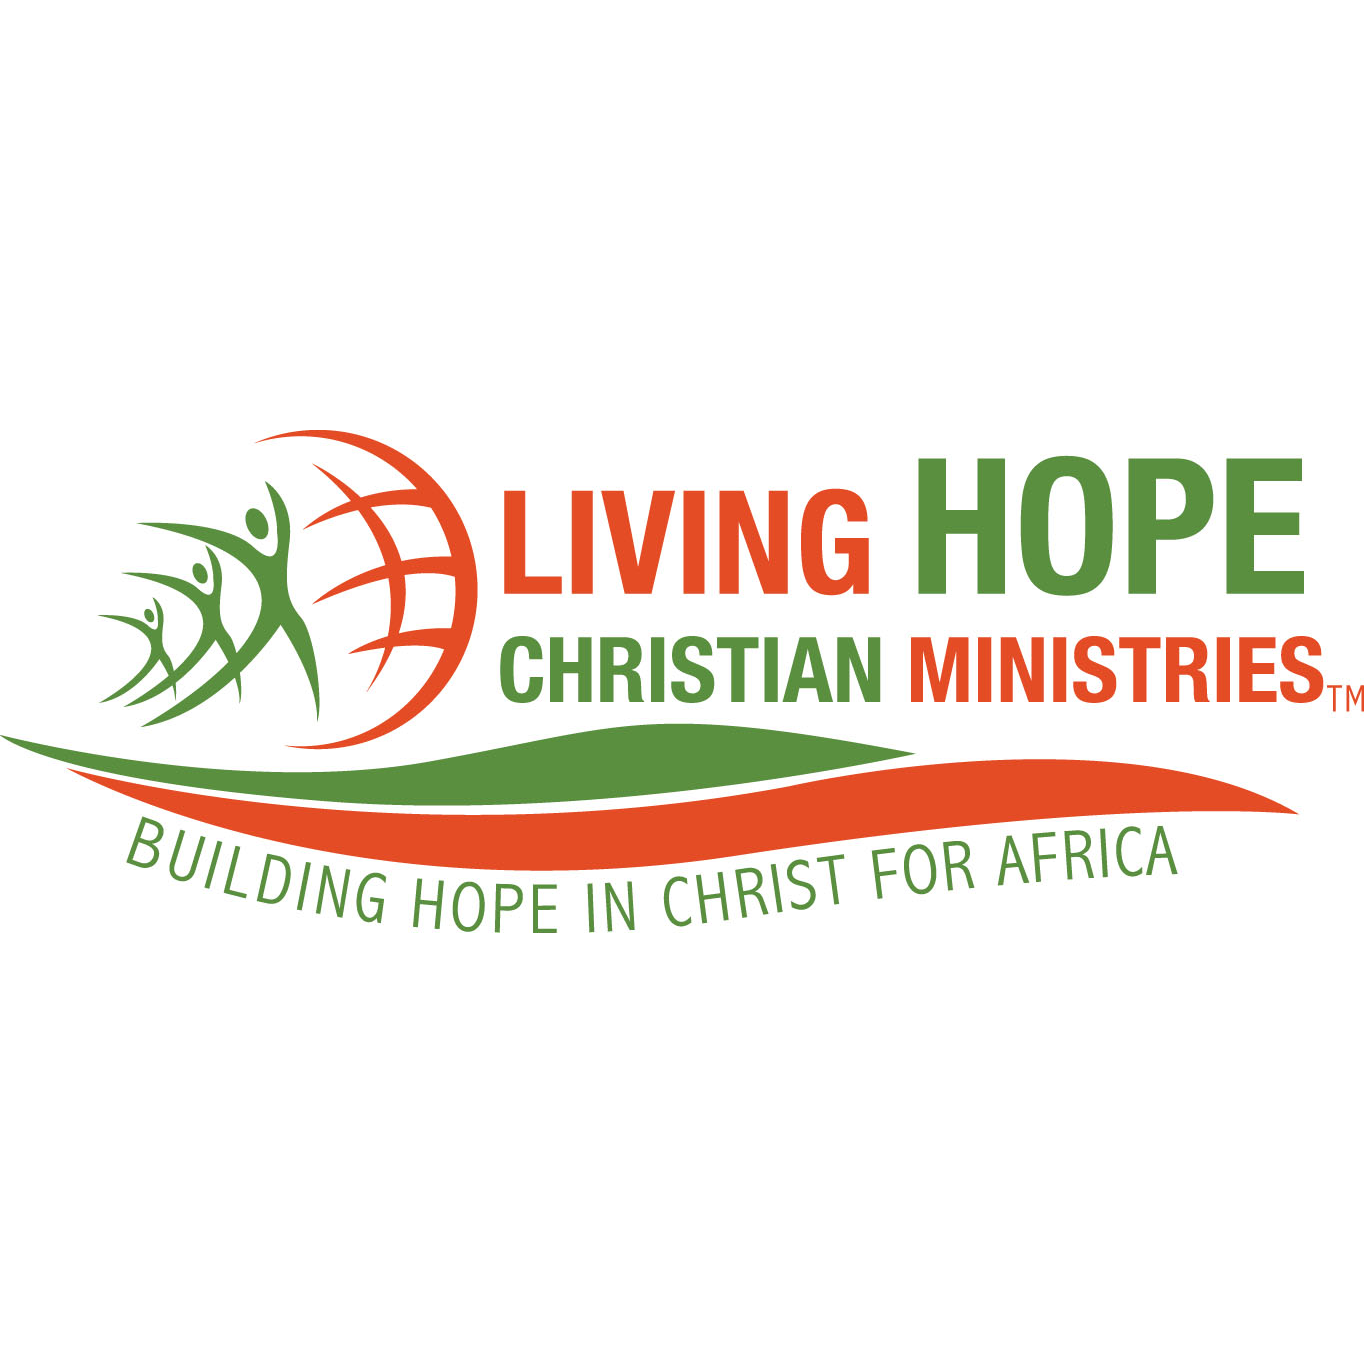 Living Hope Christian Ministries – building hope in Christ for Africa.